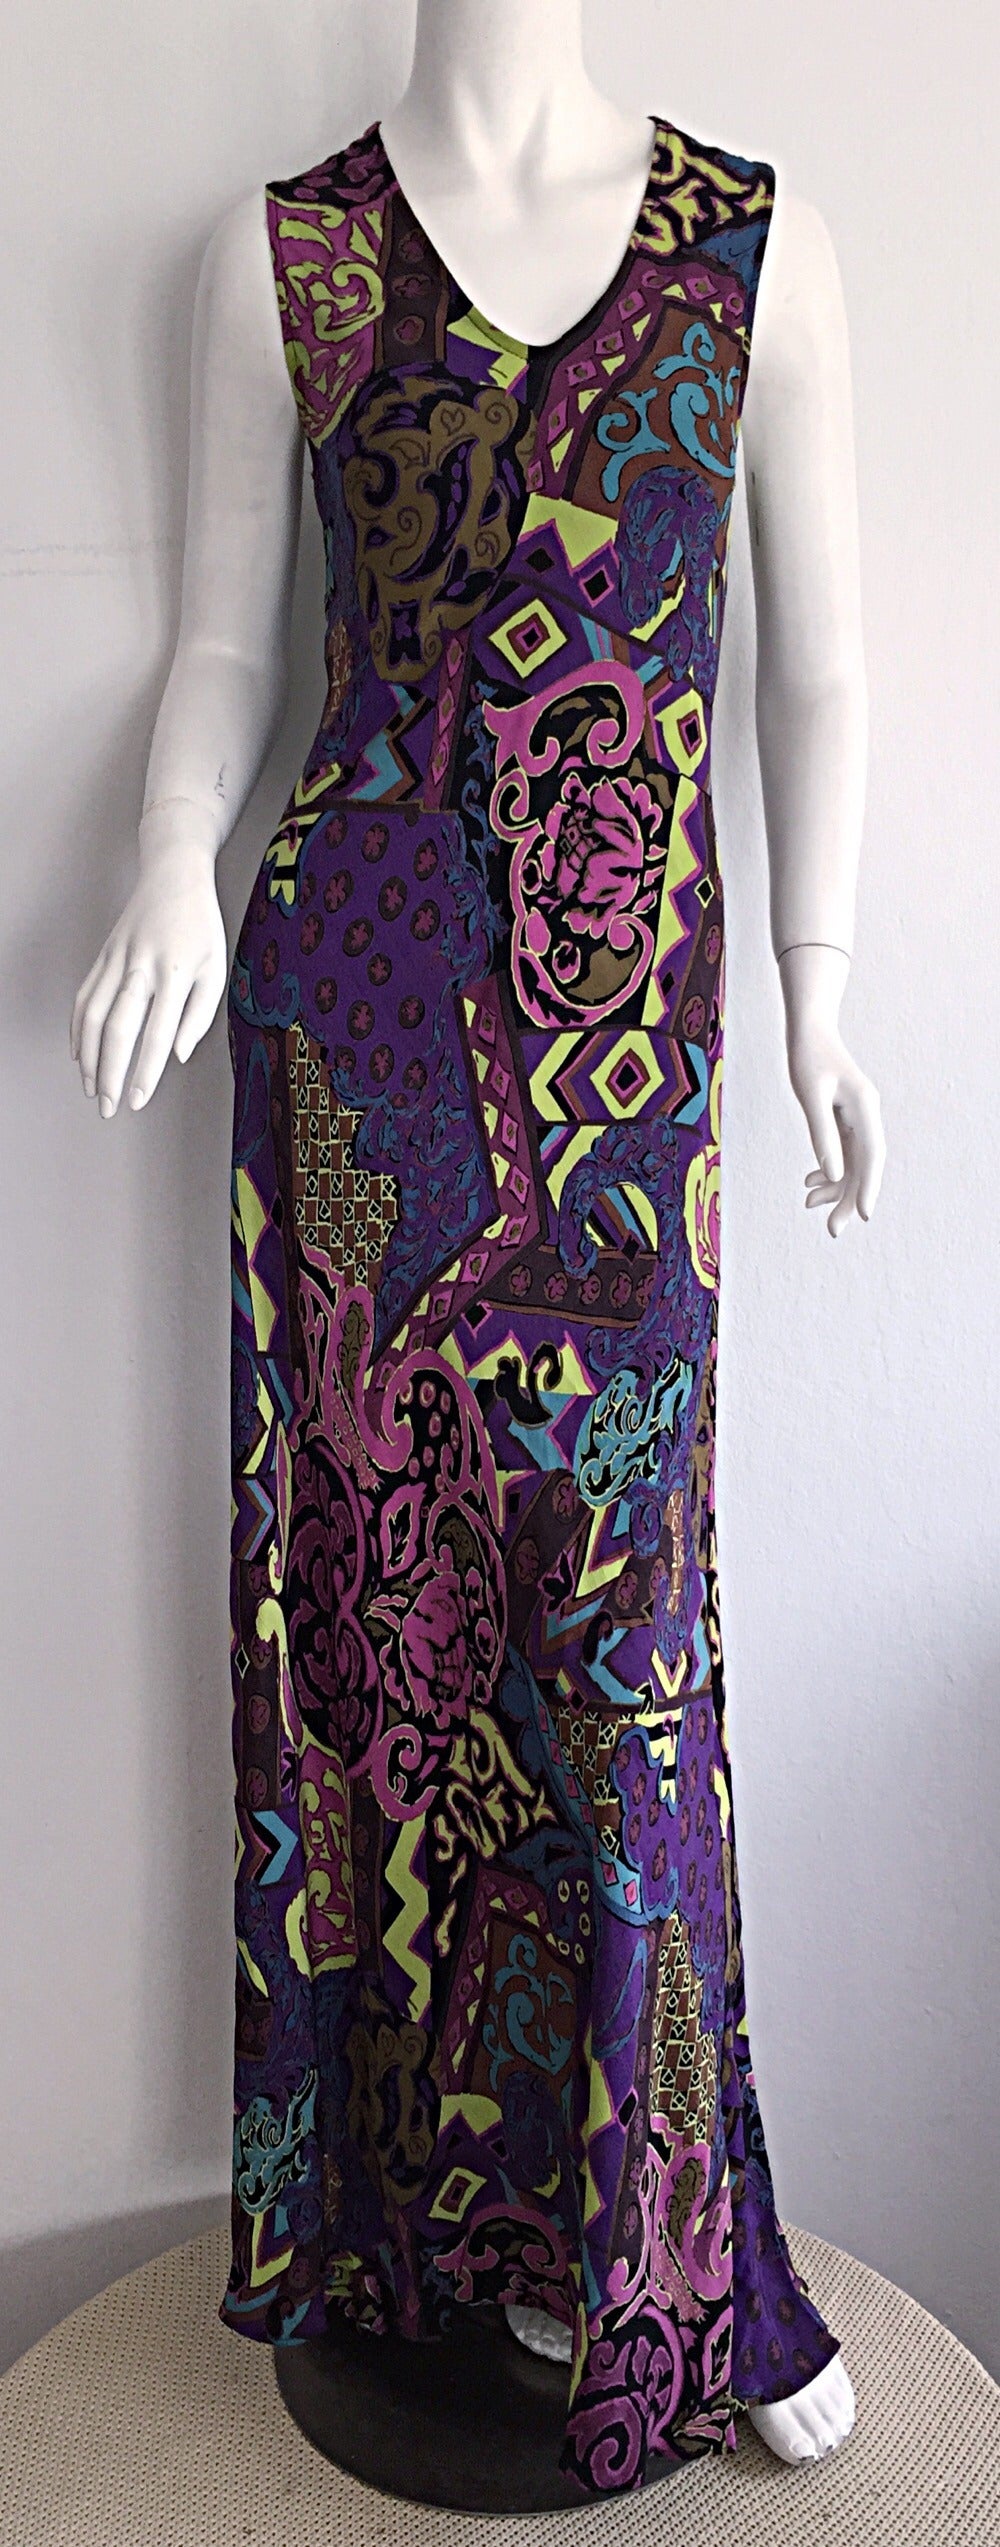 Simply amazing vintage Betsey Johnson maxi dress! Beautiful 'wallpaper' print throughout. 100% Rayon. Wonderful fit, that looks great alone, or with a belt. Perfect from day to night with sandals, wedges, or strappy heels. In great condition. Will